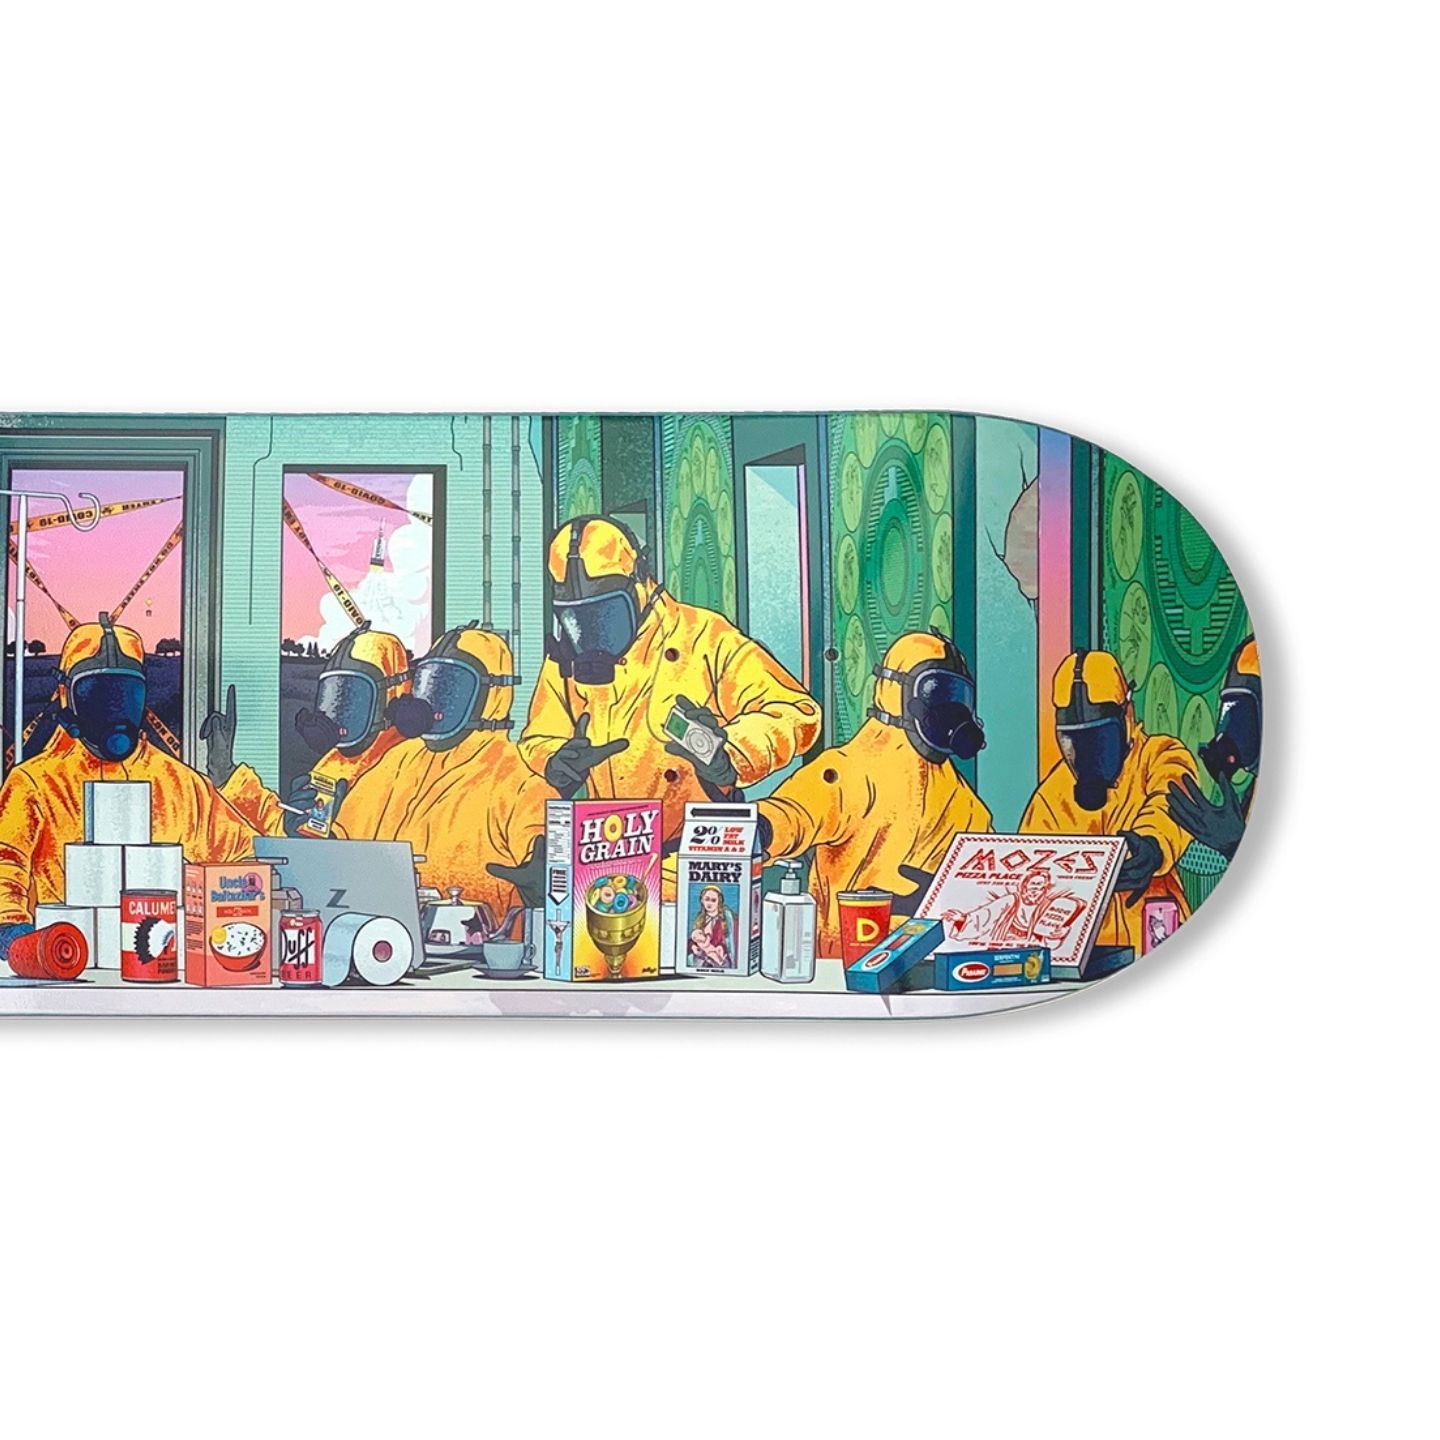 The Last Supper Skateboard By Musketon 4